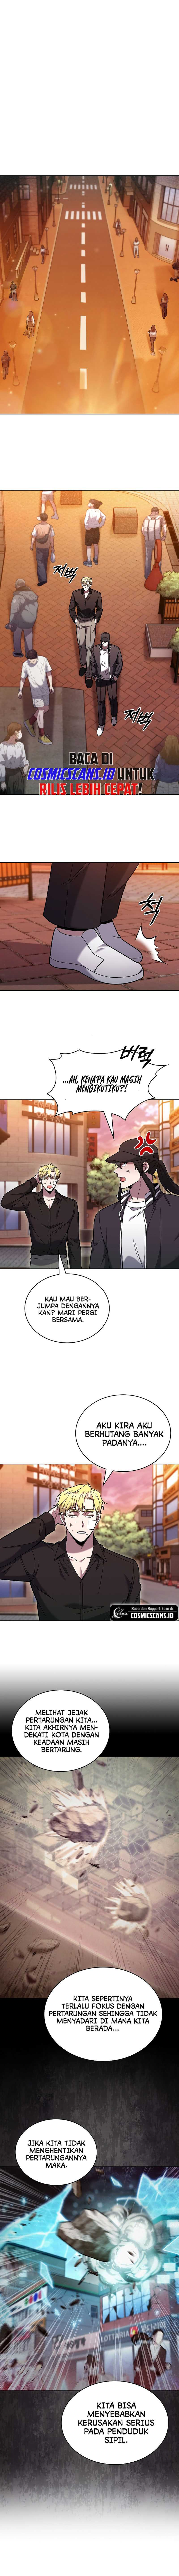 The Delivery Man From Murim Chapter 39